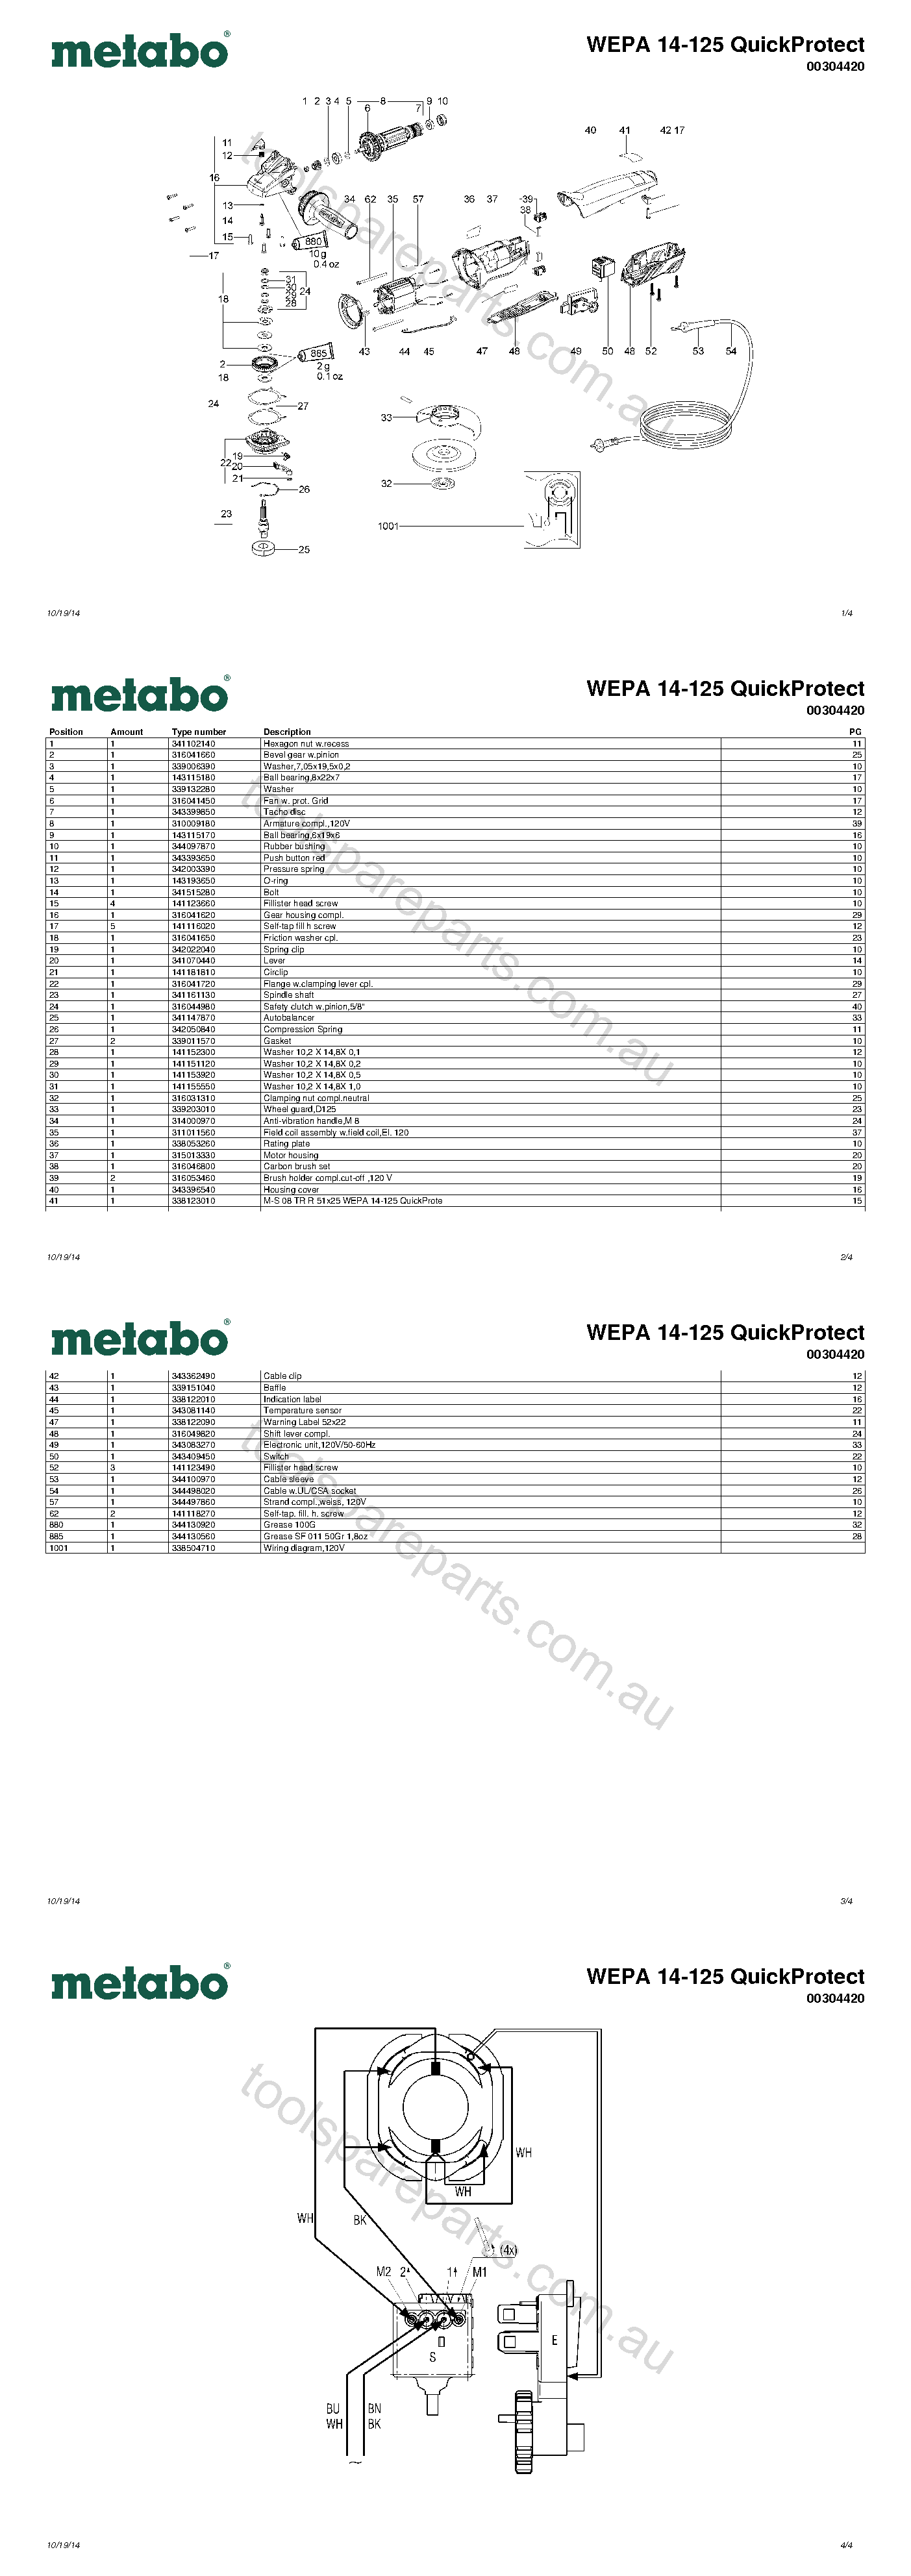 Metabo WEPA 14-125 QuickProtect 00304420  Diagram 1